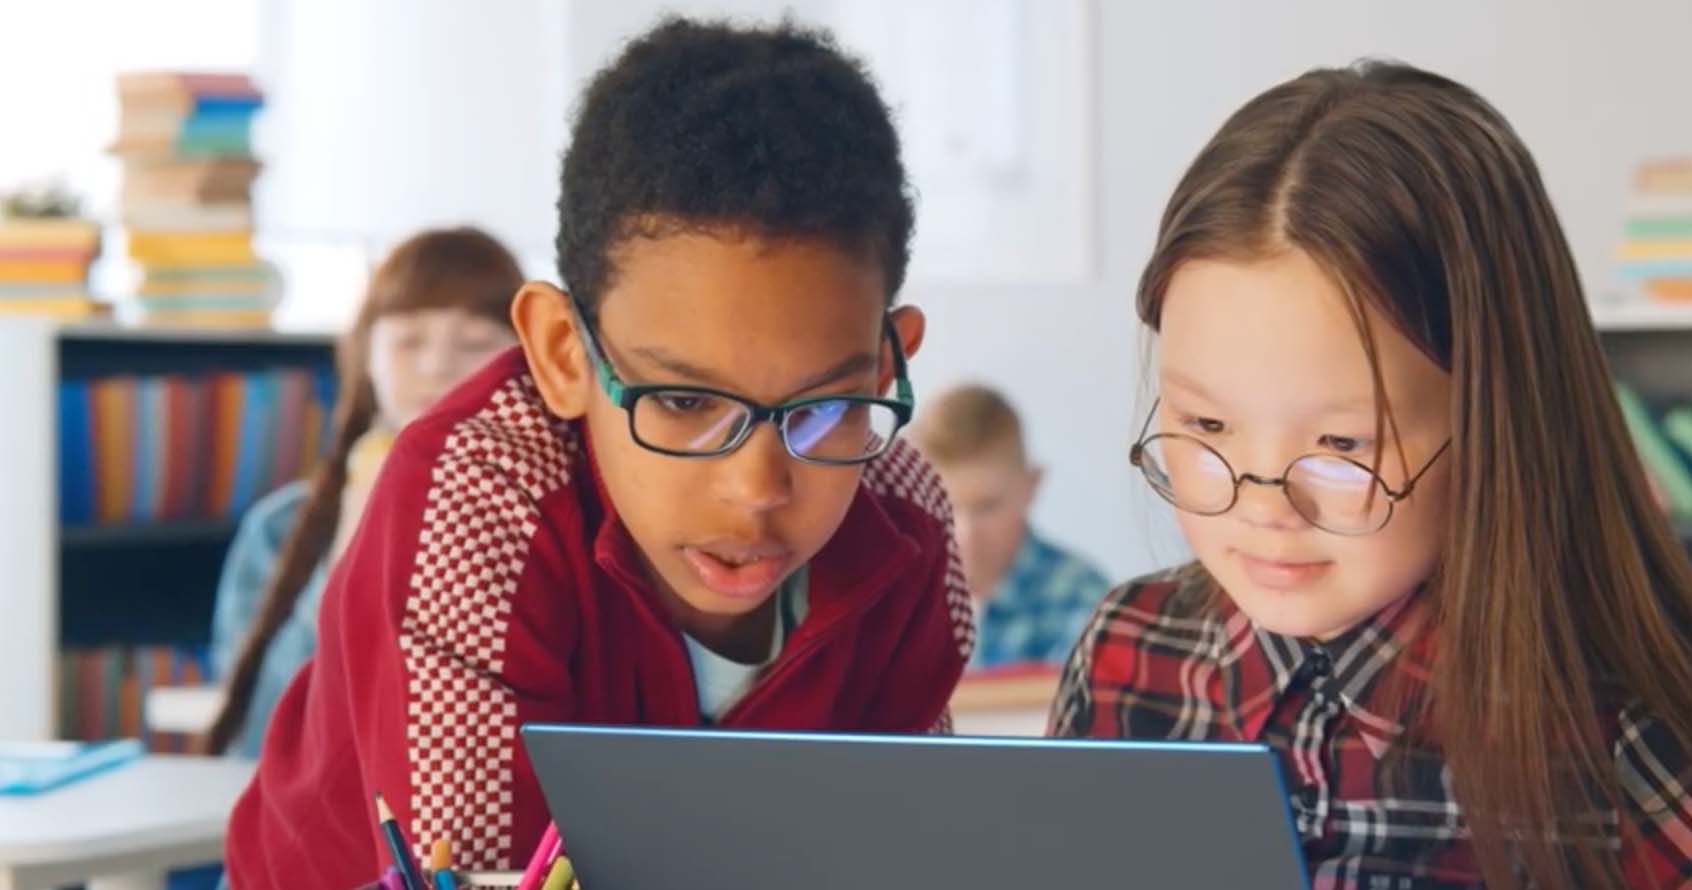 Kids looking at a computer